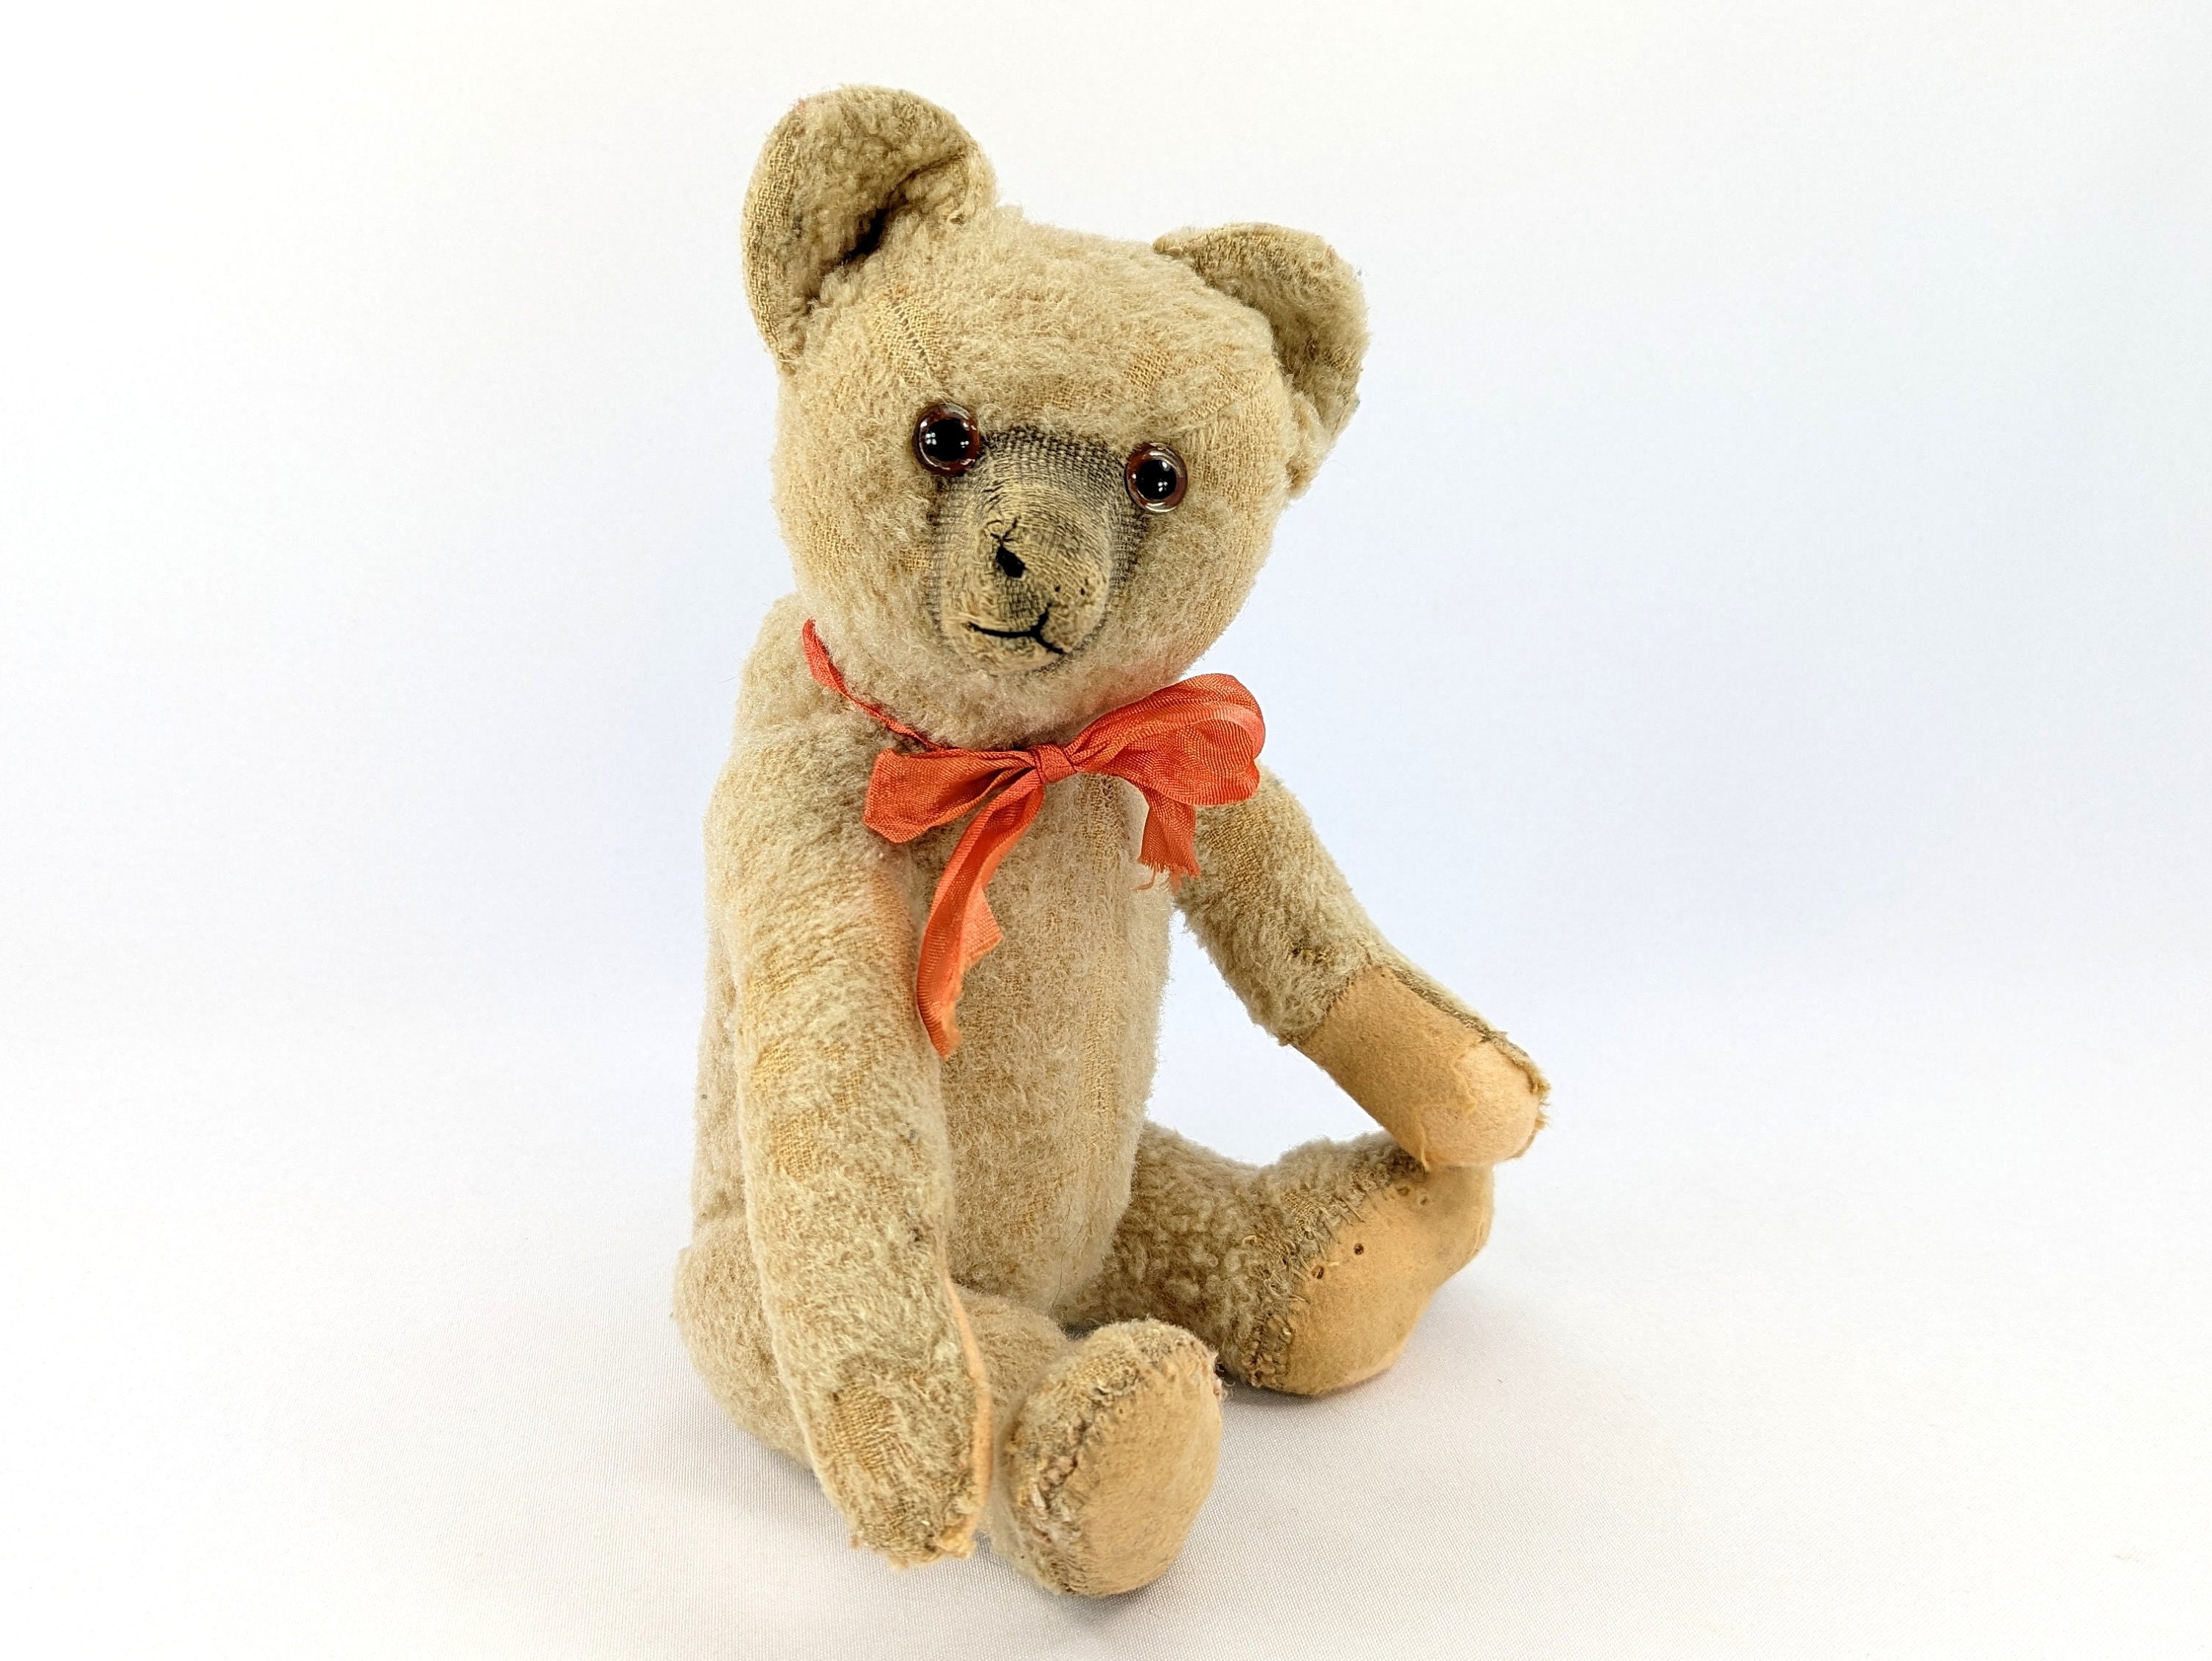 Antique 1920s German Teddy Bear Made by Willy Weiersmuller in